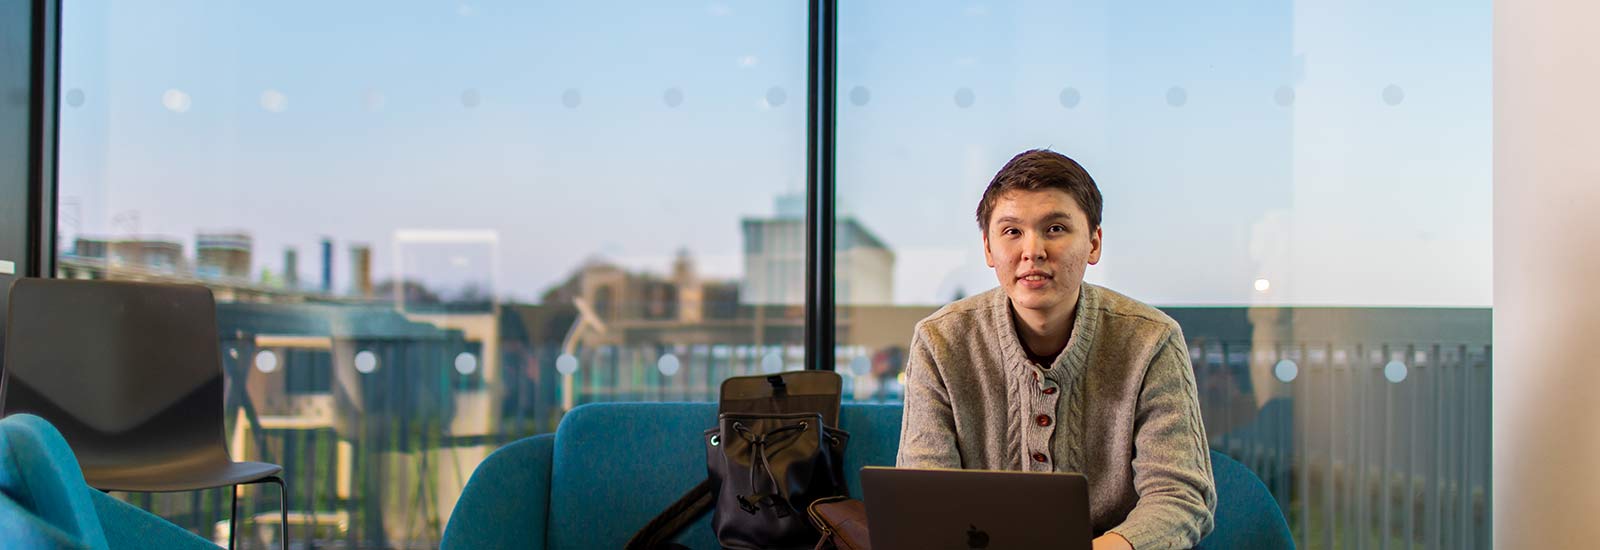 Student sitting on laptop in front of window